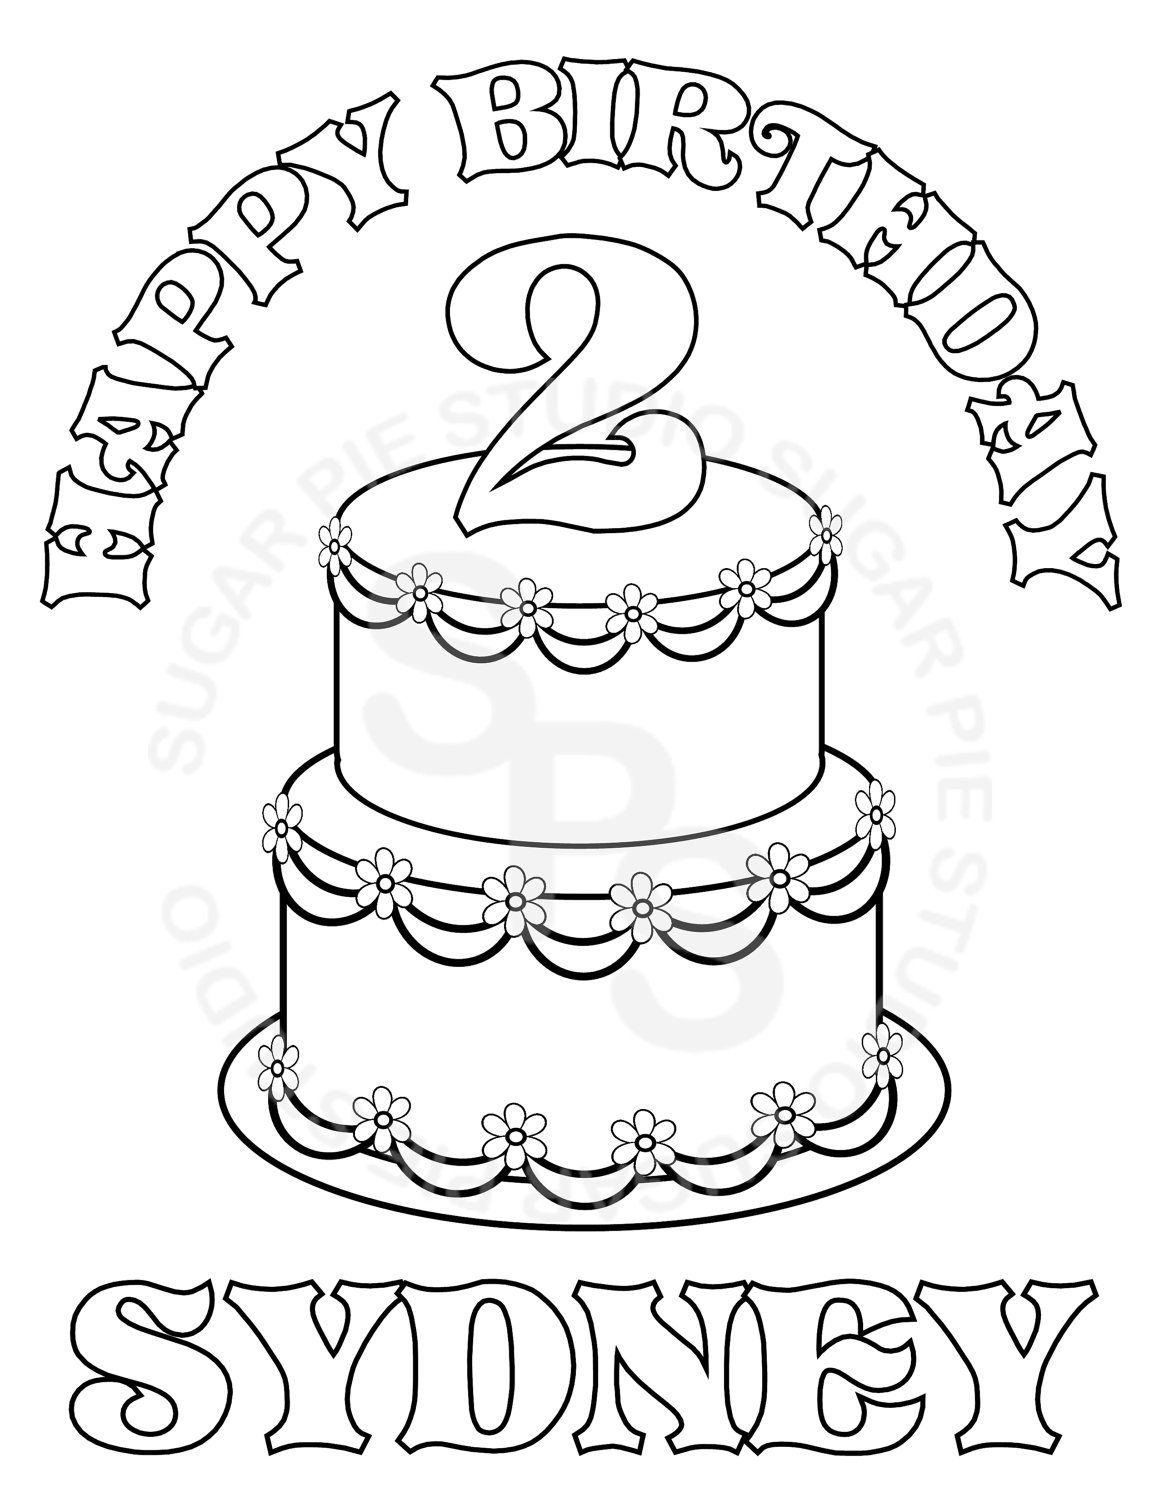 Custom Name Coloring Pages At Getcolorings.com | Free Printable